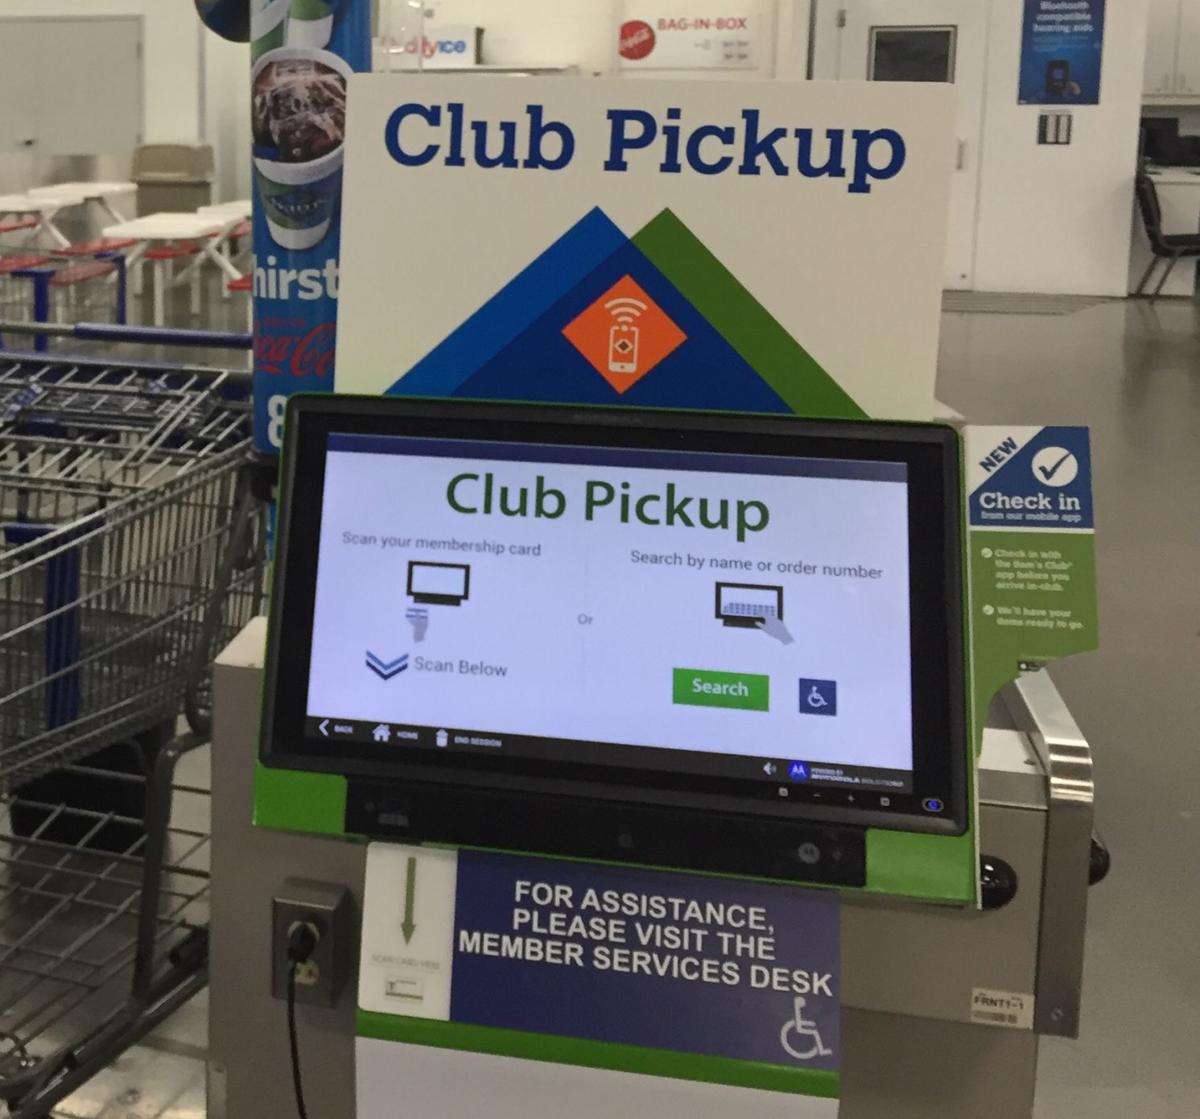 Did you have a better Club Pickup experience at Sam's Club?